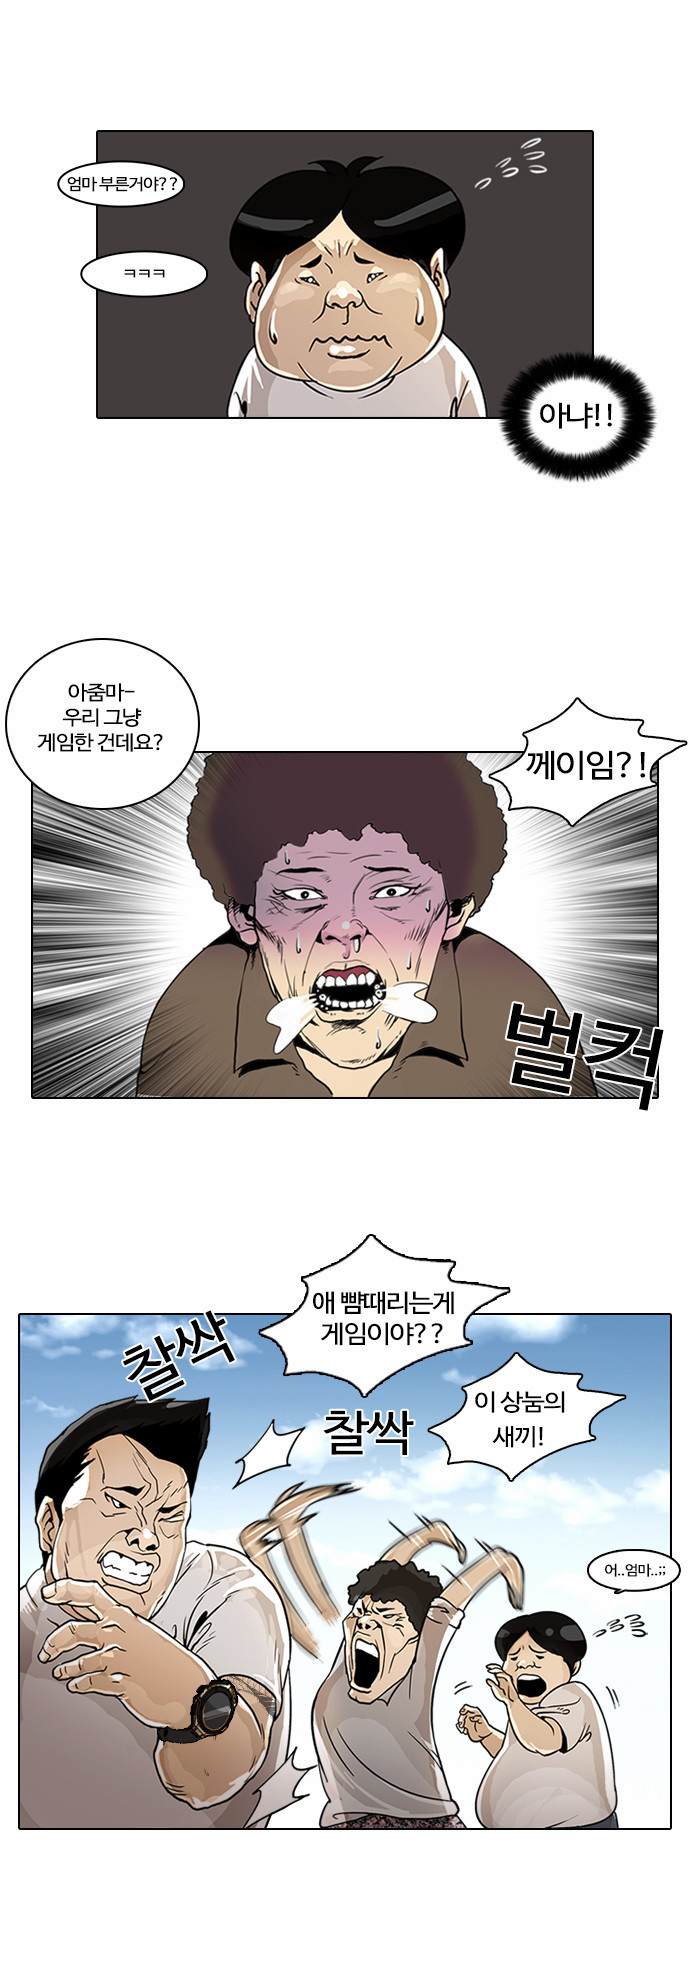 Lookism - Chapter 2 - Page 3